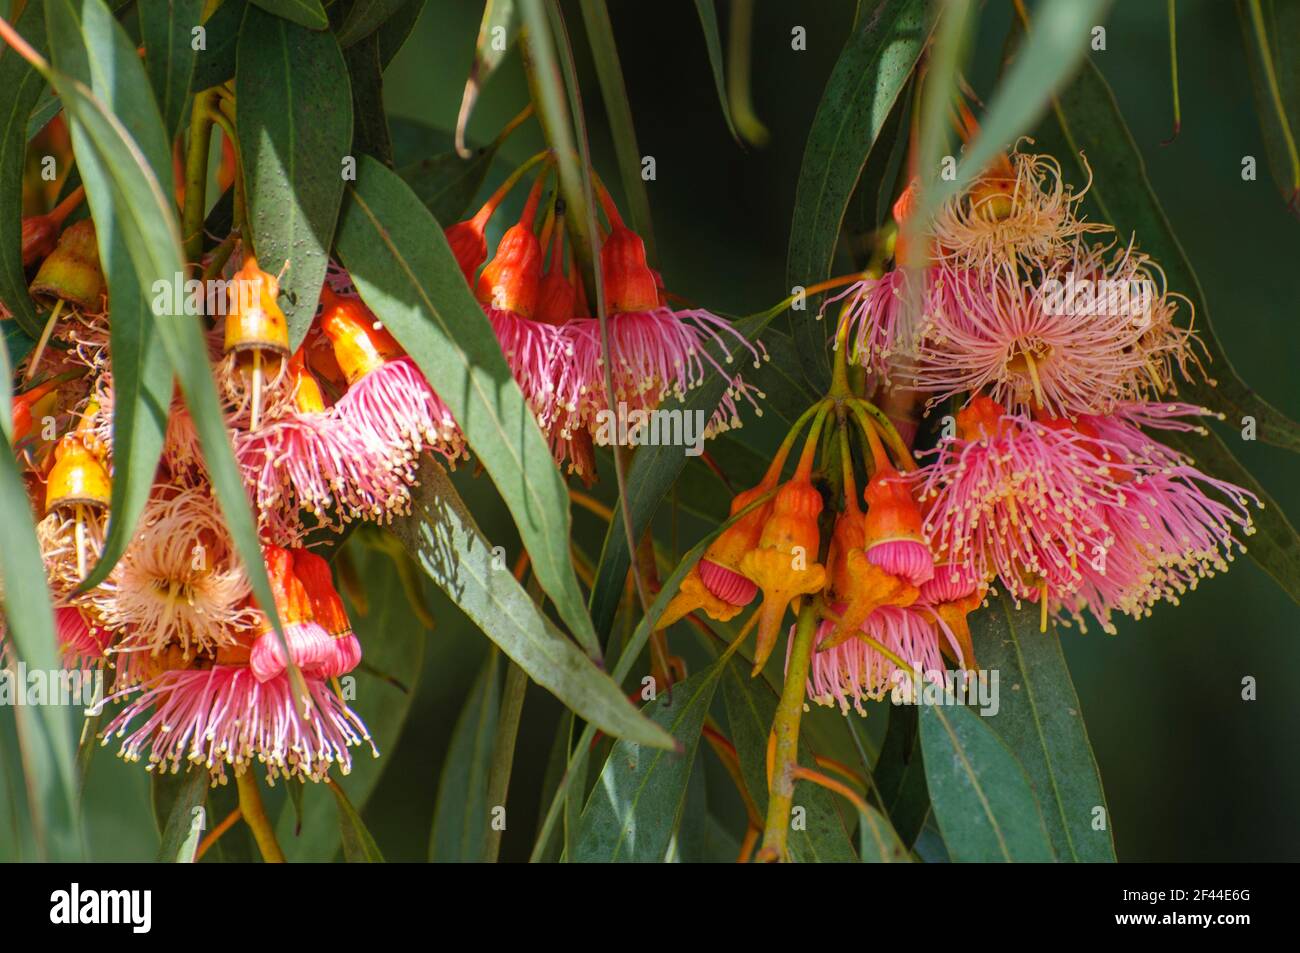 Corymbia ficifolia grafted 'Coral Pink Flowering Gum